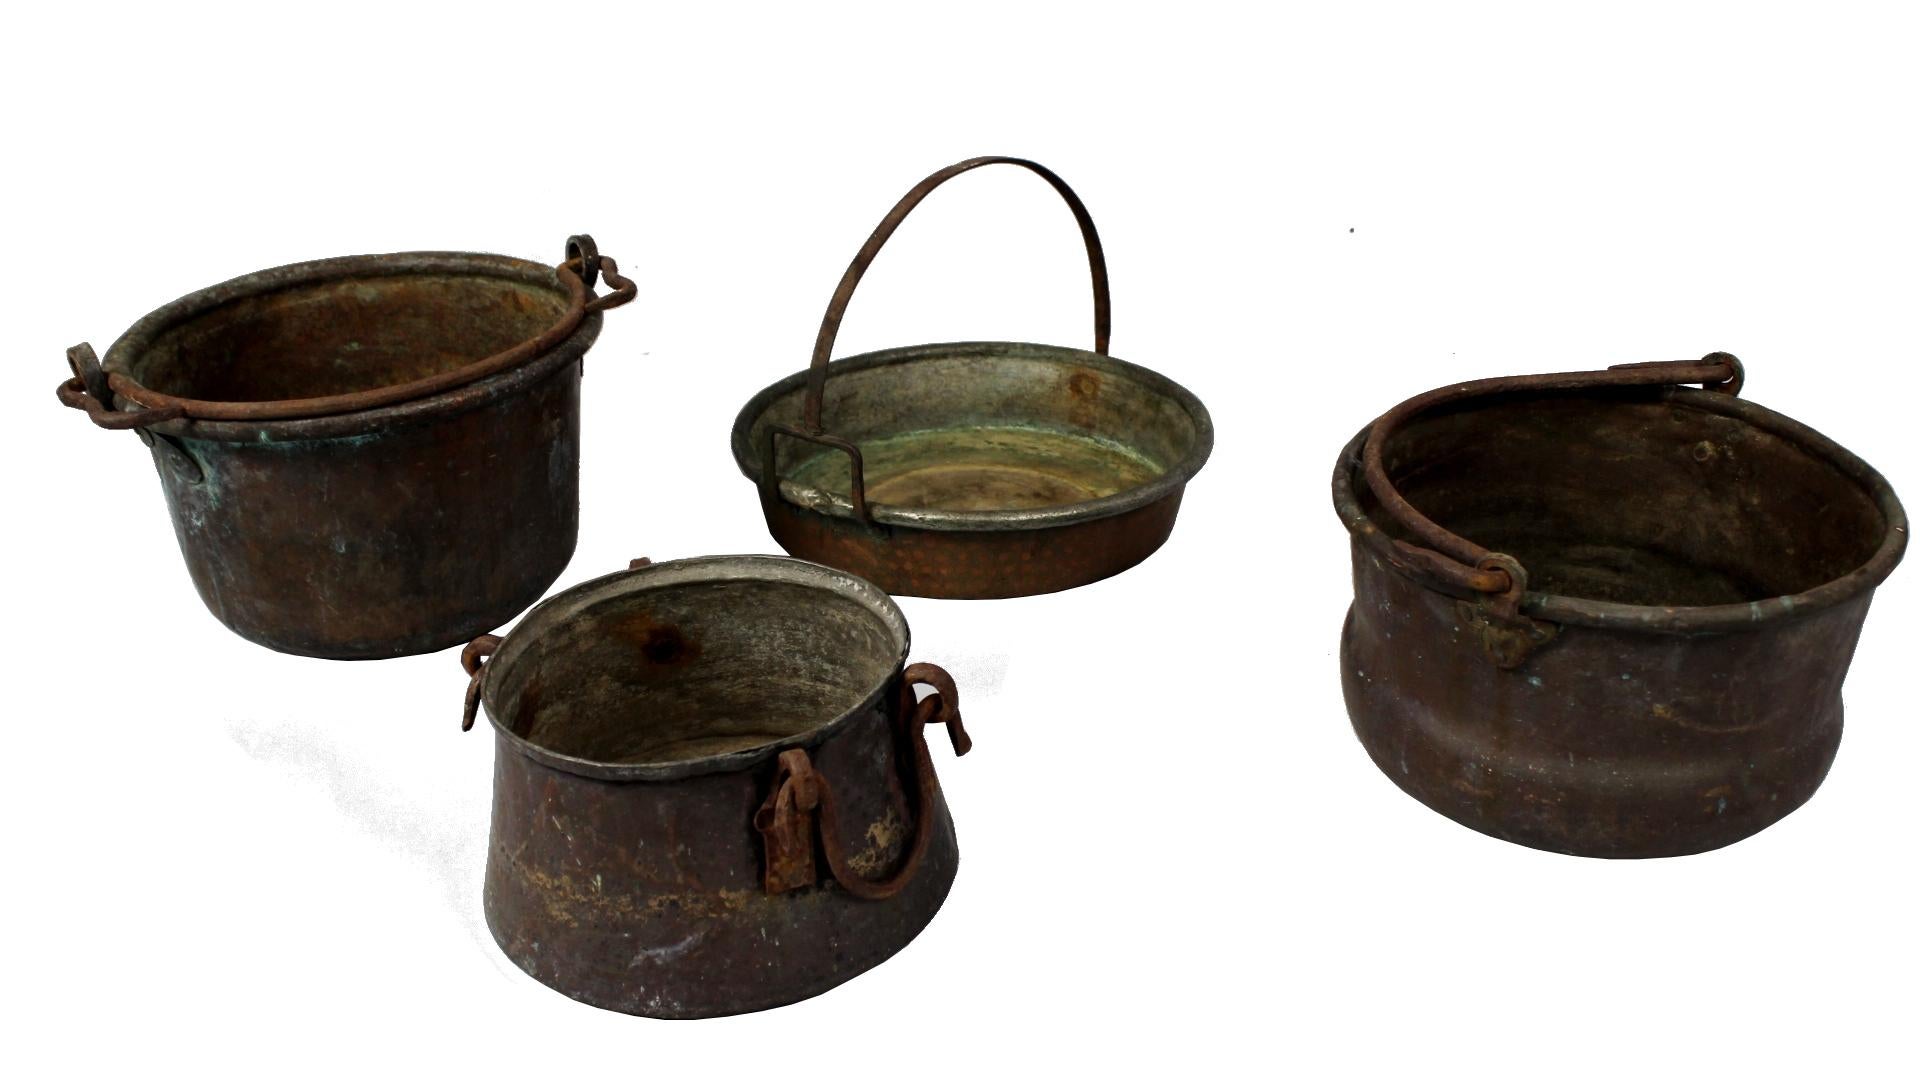 Set of four weathered copper pots, made in the 19th century. They are in original condition with patina.
Measurements:
Dm 33cm/ 13in., H 21cm/ 8.27in.
Dm 25.5cm/ 10.04 in., H 14.5cm/ 5.7in.
Dm 30.5cm/ 12in., H 14.5cm/ 5.7in.
Dm 35.5cm/